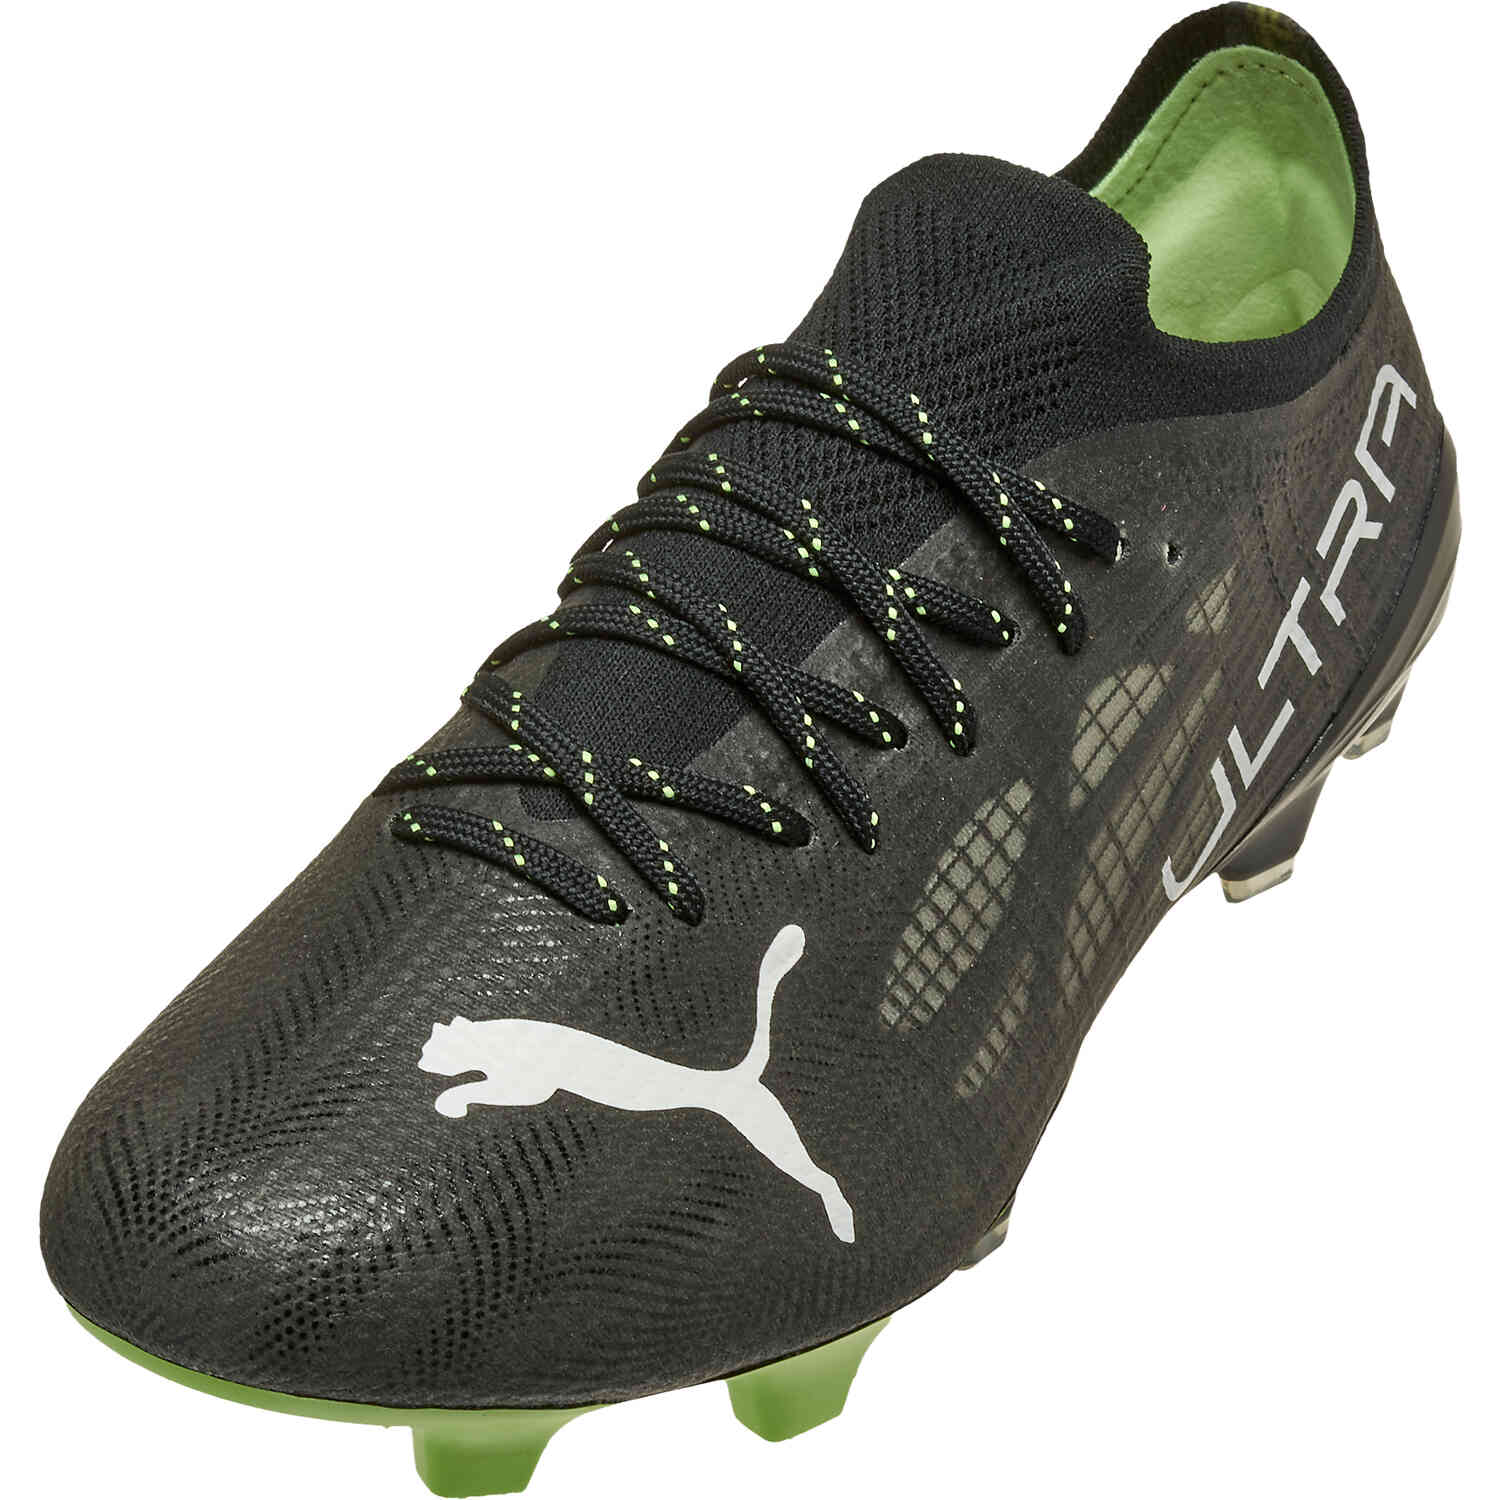 PUMA ULTRA 1.4 FG/AG Soccer Cleats - Black & White with Fizzy Light